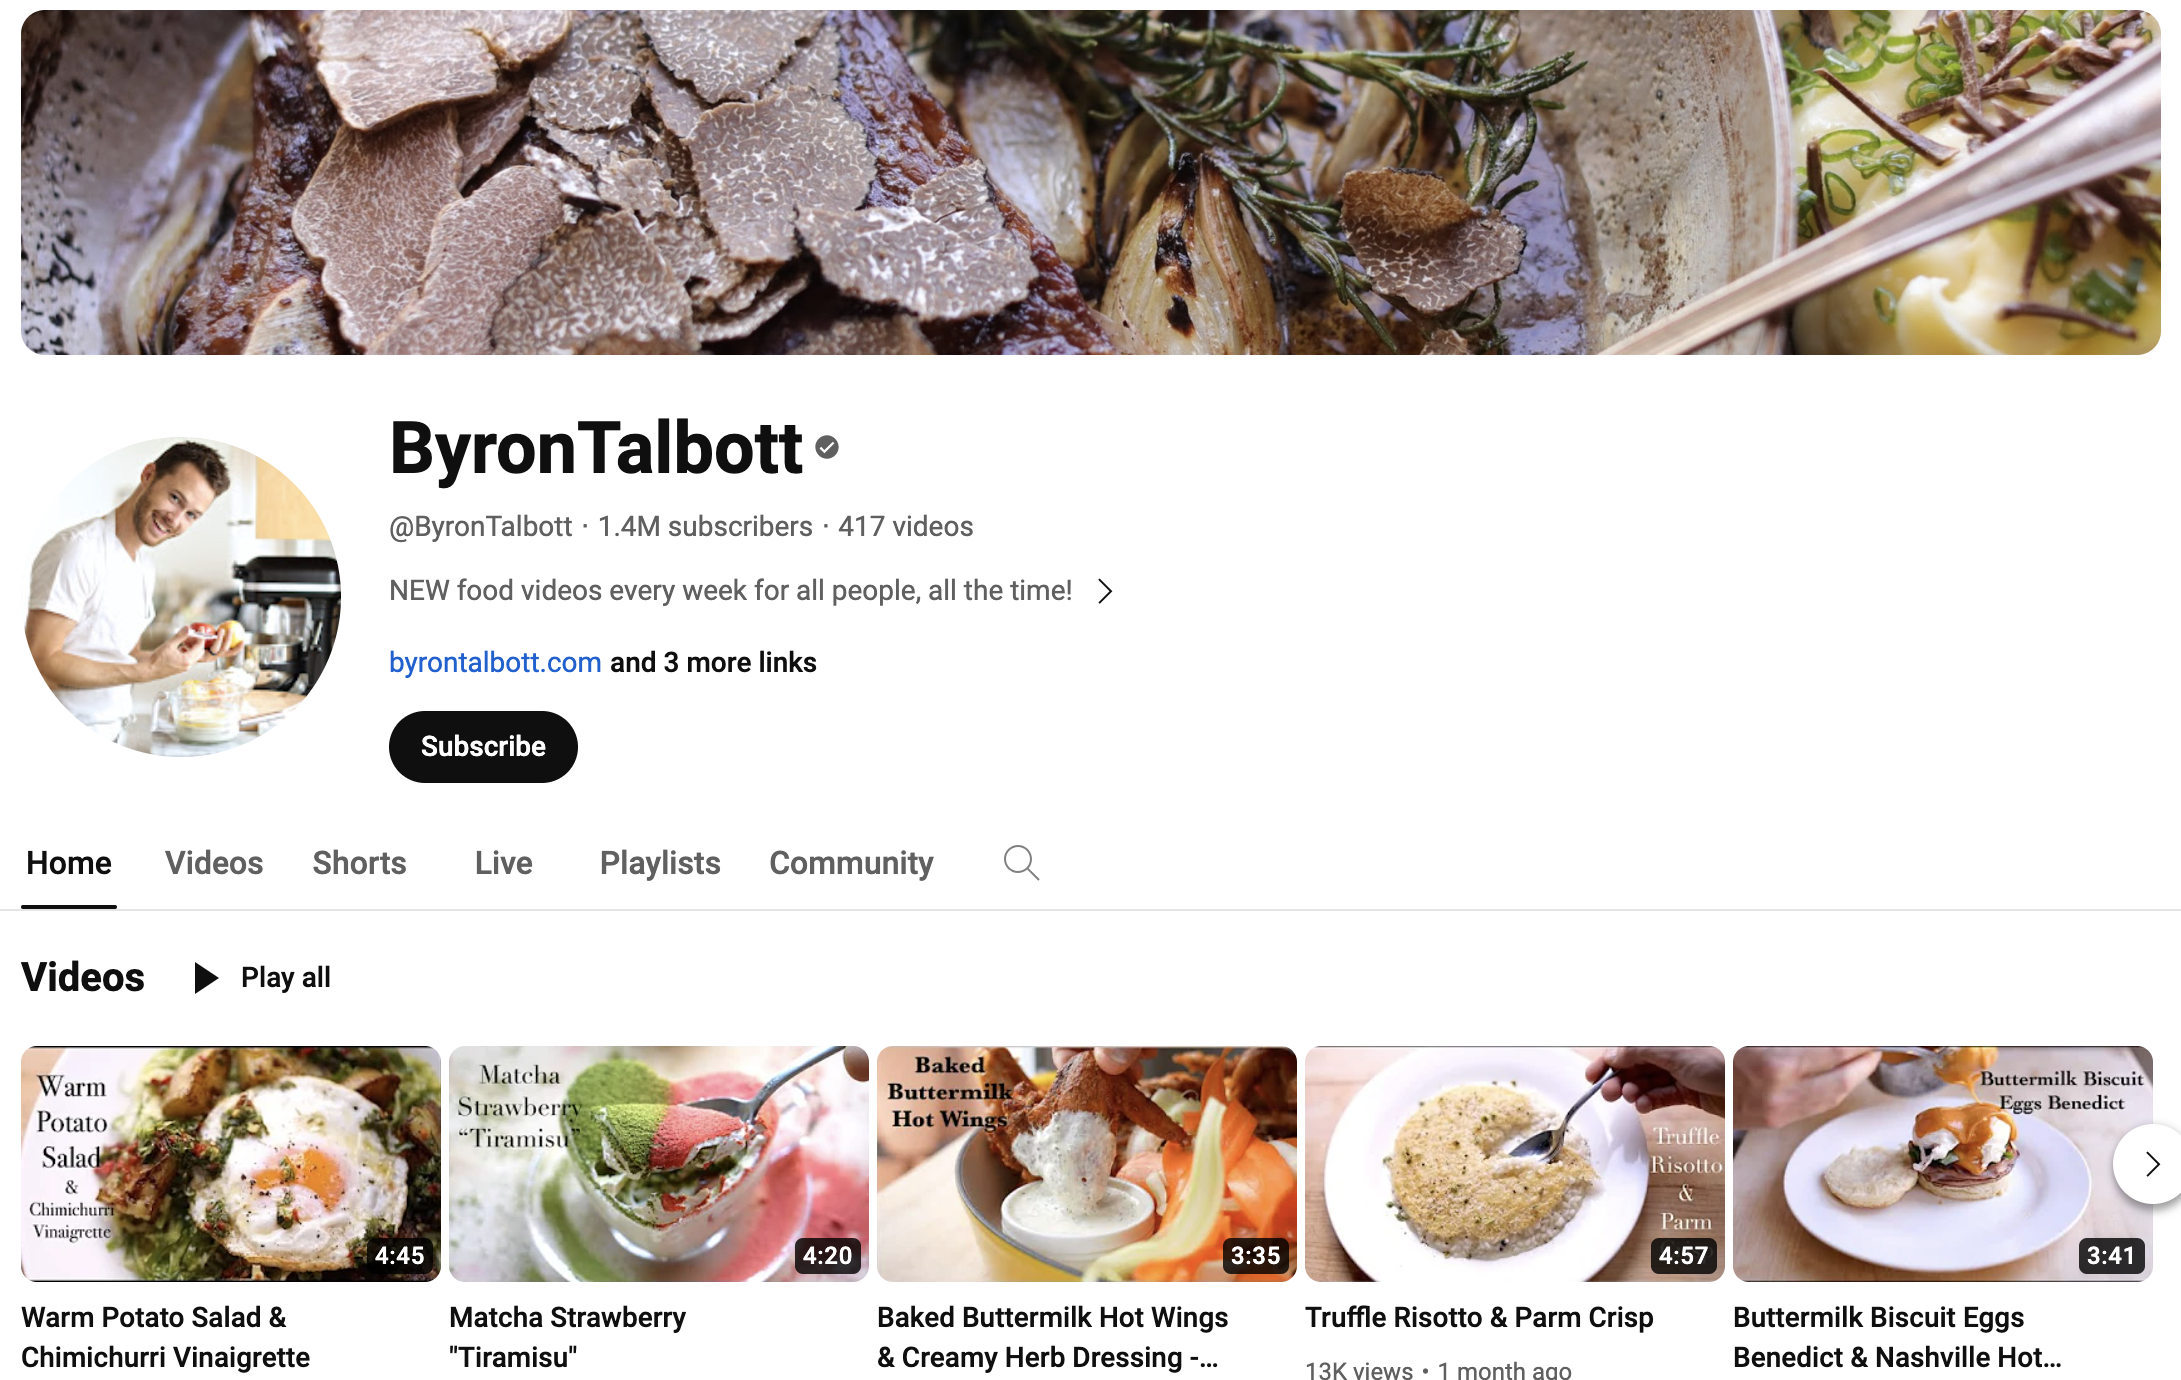 Screenshot of the home page for the YouTube cooking channel ByronTalbott